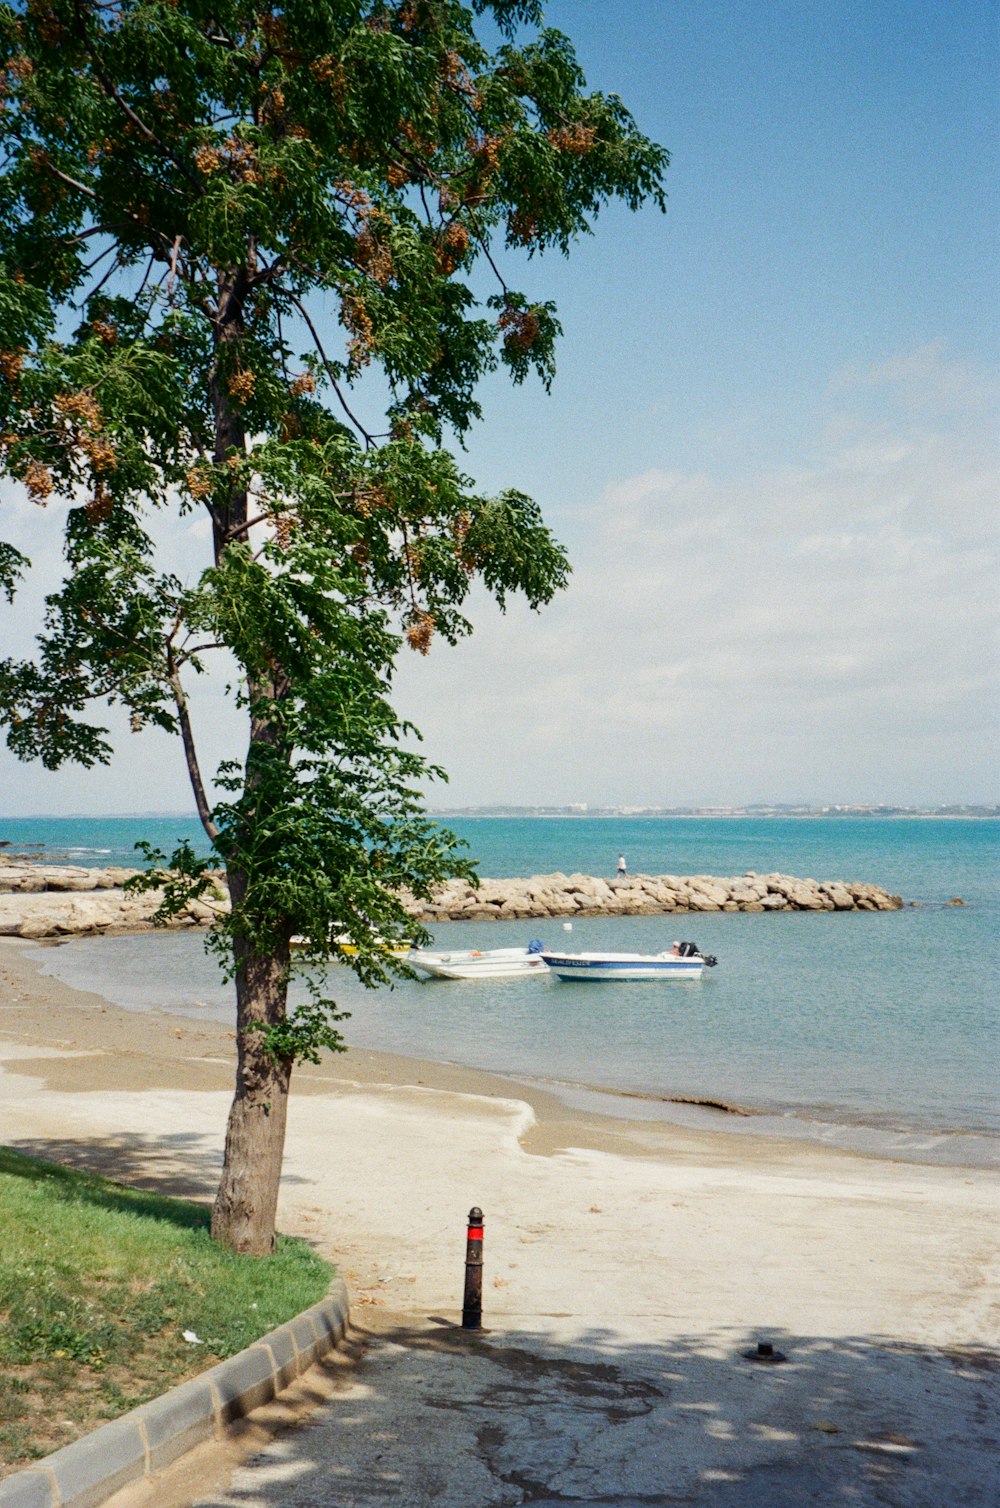 a boat is out on the water near a beach